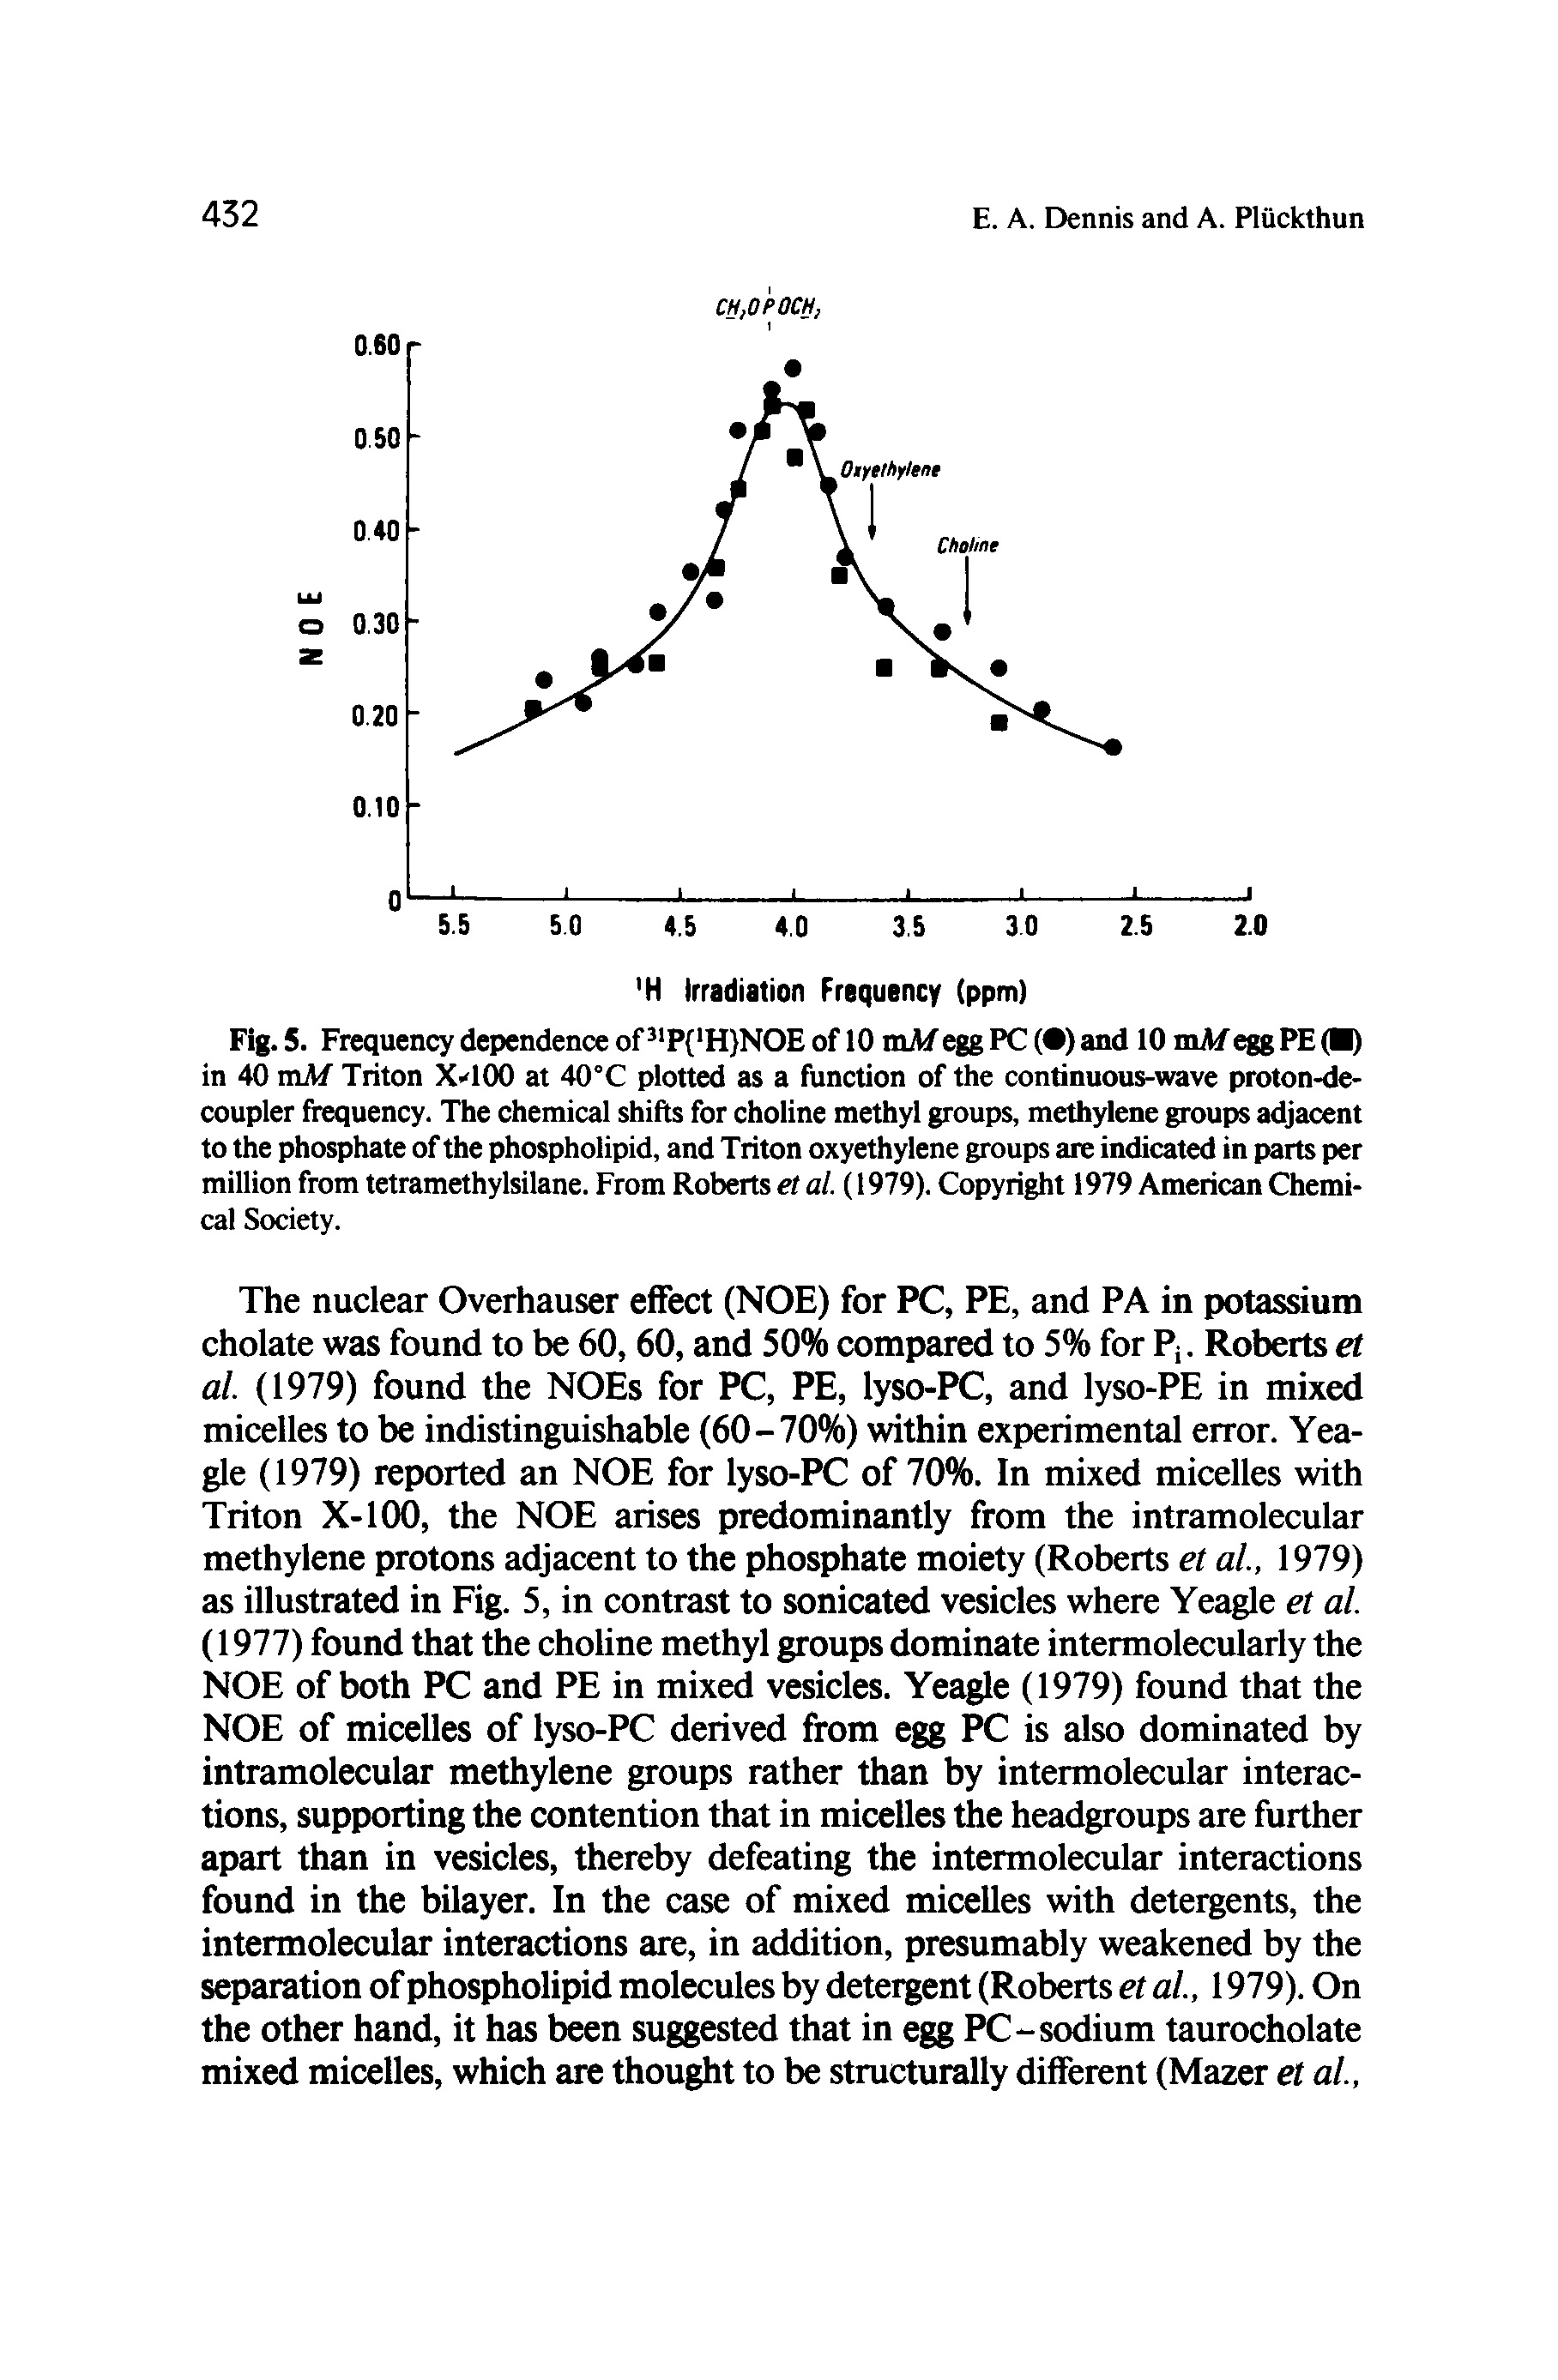 Fig. 5. Frequency dependence of P H NOE of 10 mAf egg PC ( ) and 10 mMegg PE ( ) in 40 toM Triton X->100 at 40°C plotted as a function of the continuous-wave proton-decoupler frequency. The chemical shifts for choline methyl groups, methylene groups adjacent to the phosphate of the phospholipid, and Triton oxyethylene groups are indicated in parts per million from tetramethylsilane. From Roberts et al. (1979). Copyright 1979 American Chemical Society.